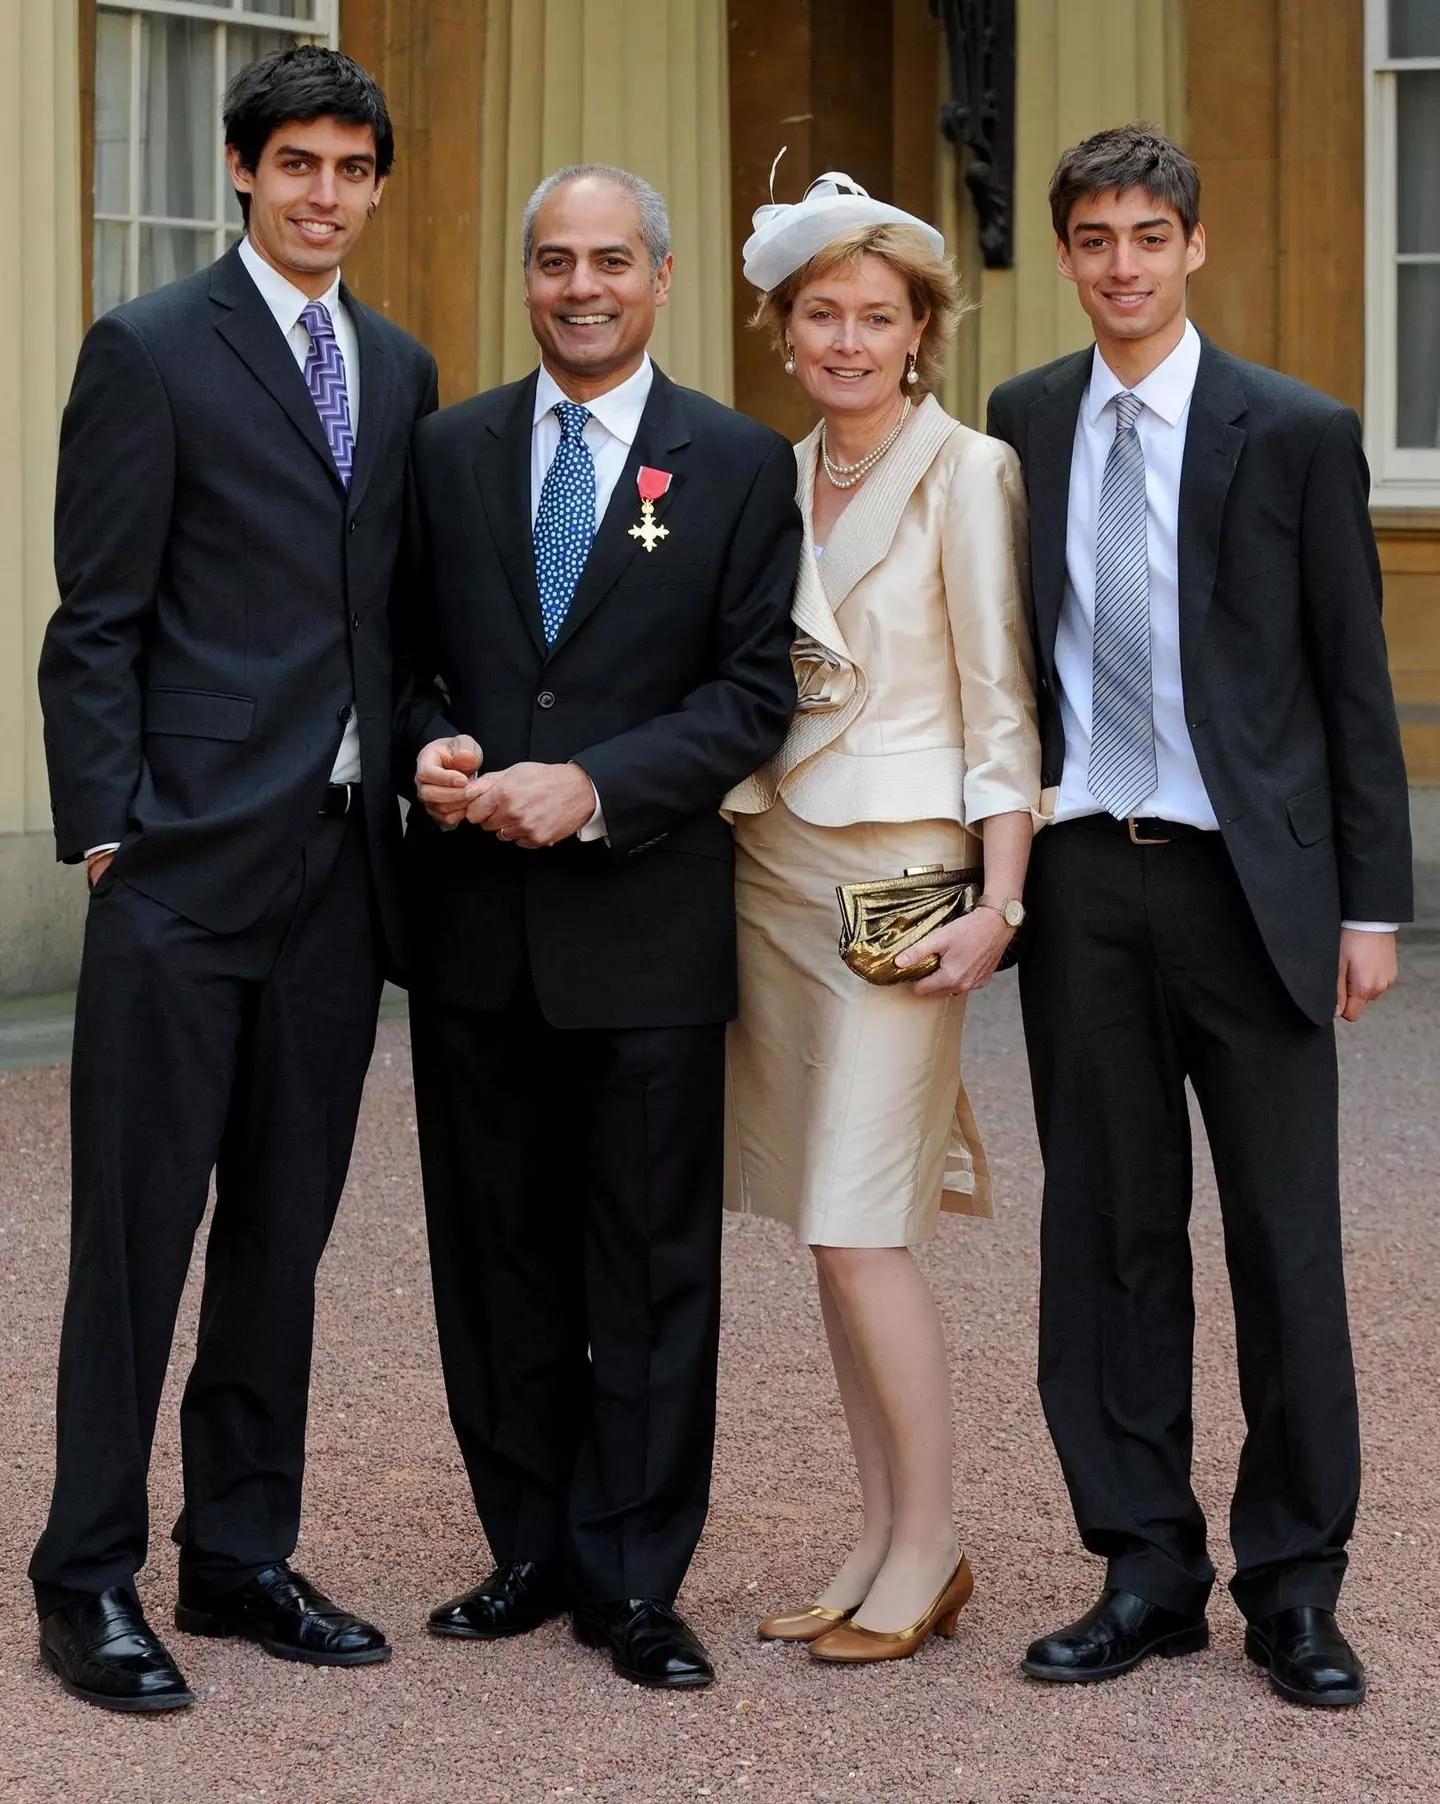 George Alagiah accompanied by his wife Frances, alongside sons Adam and Matt.